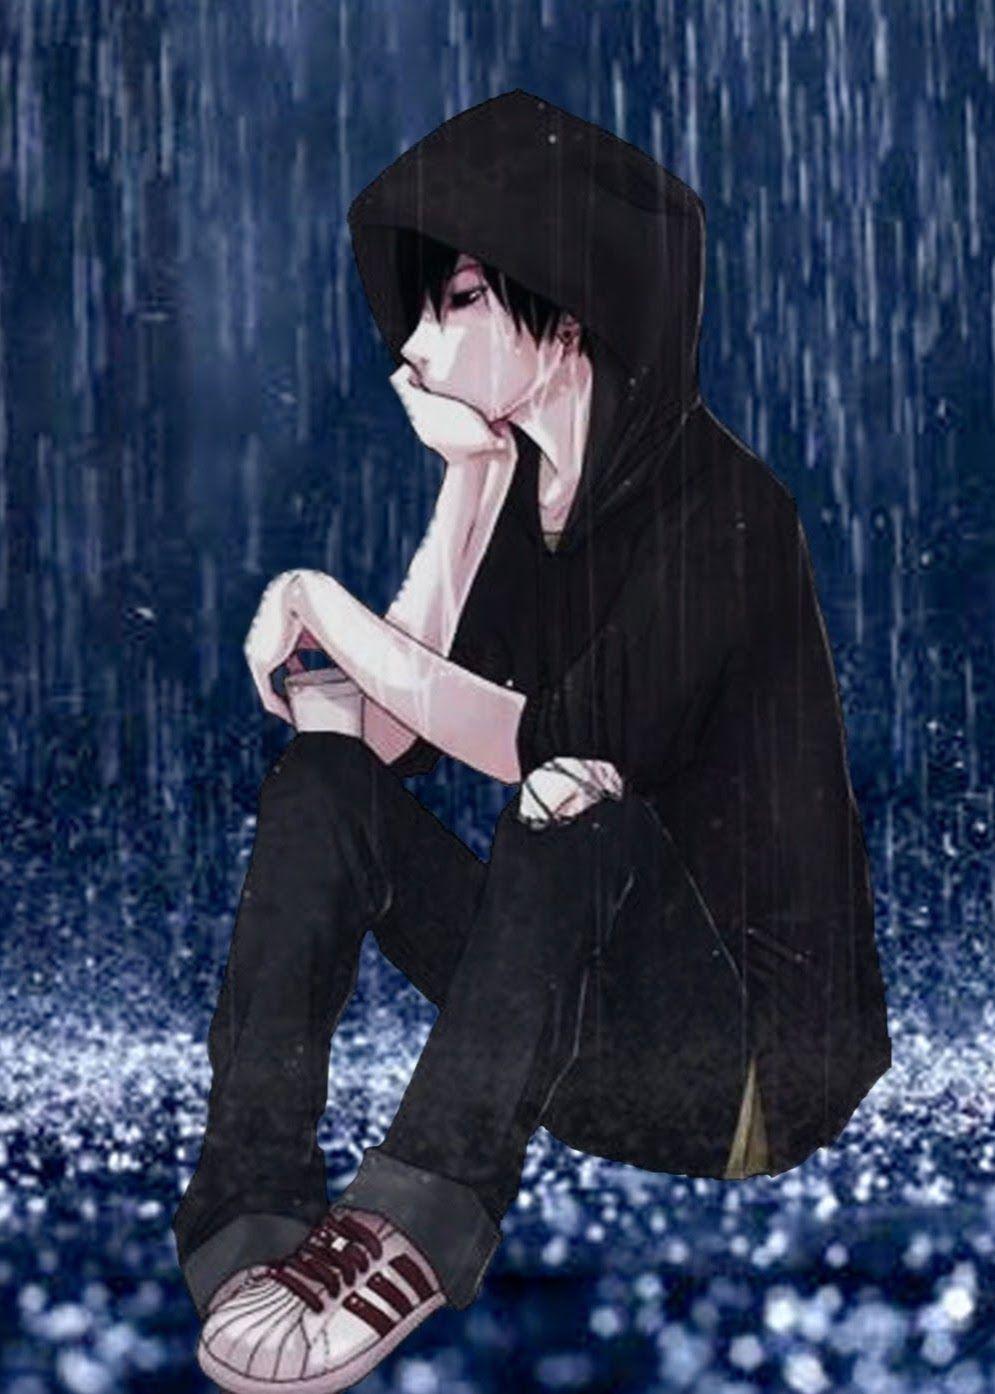 Lonely sad anime boy wallpapers